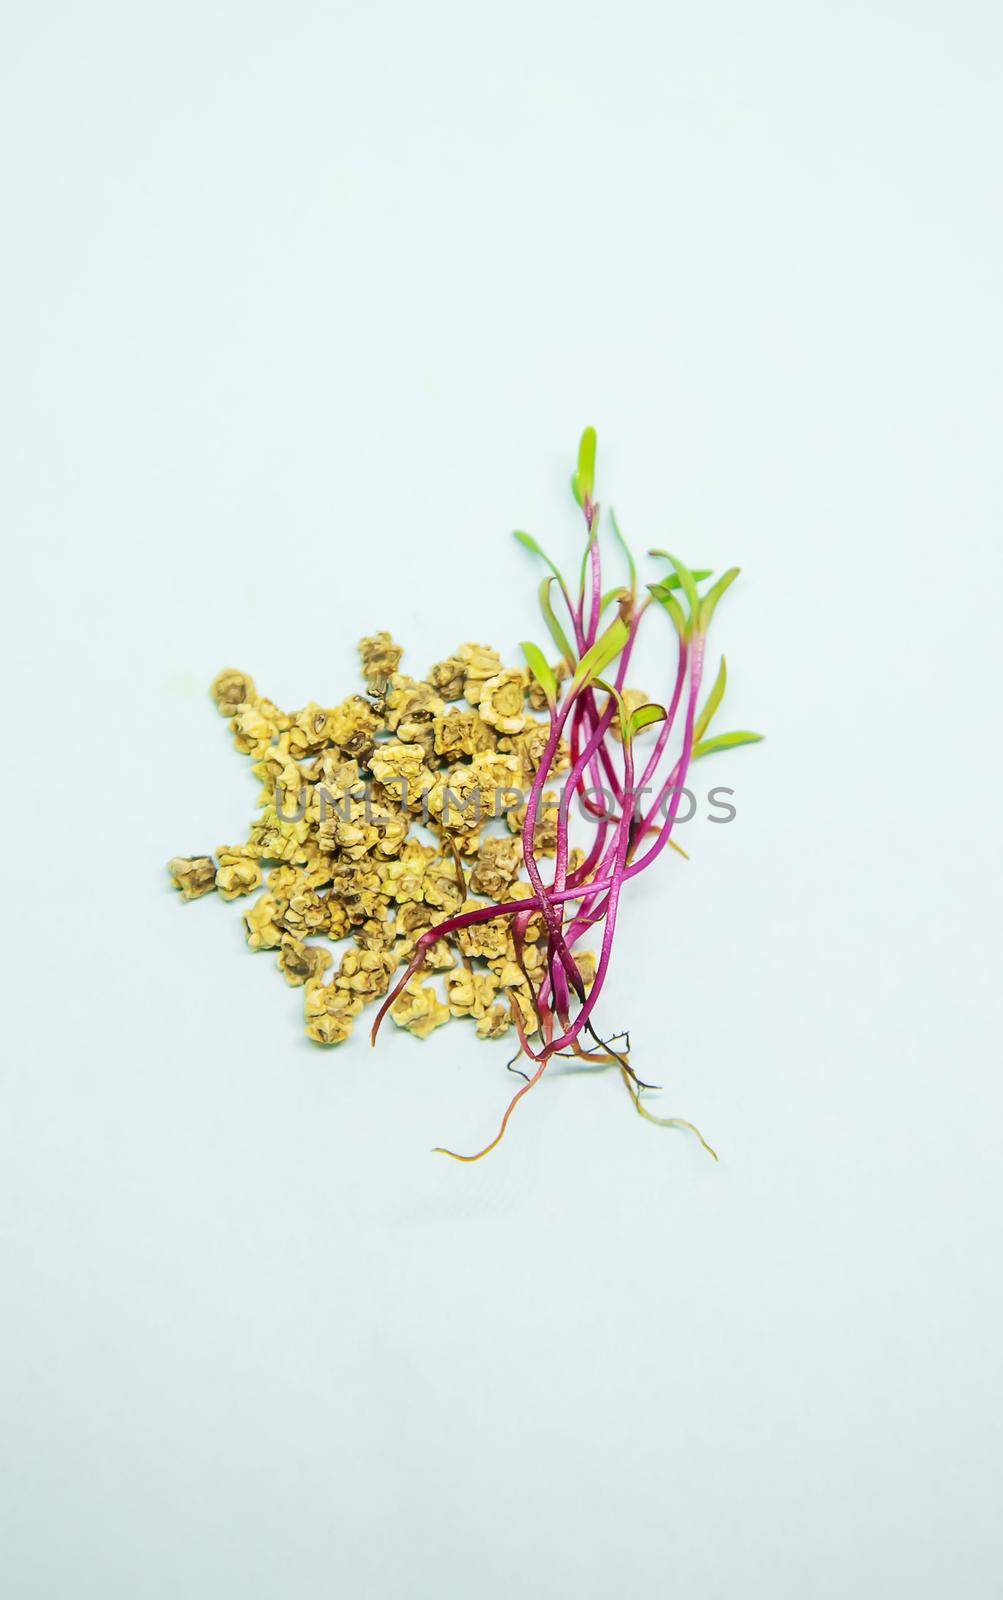 beet microgreen sprouts on a white background. Selective focus. nature.